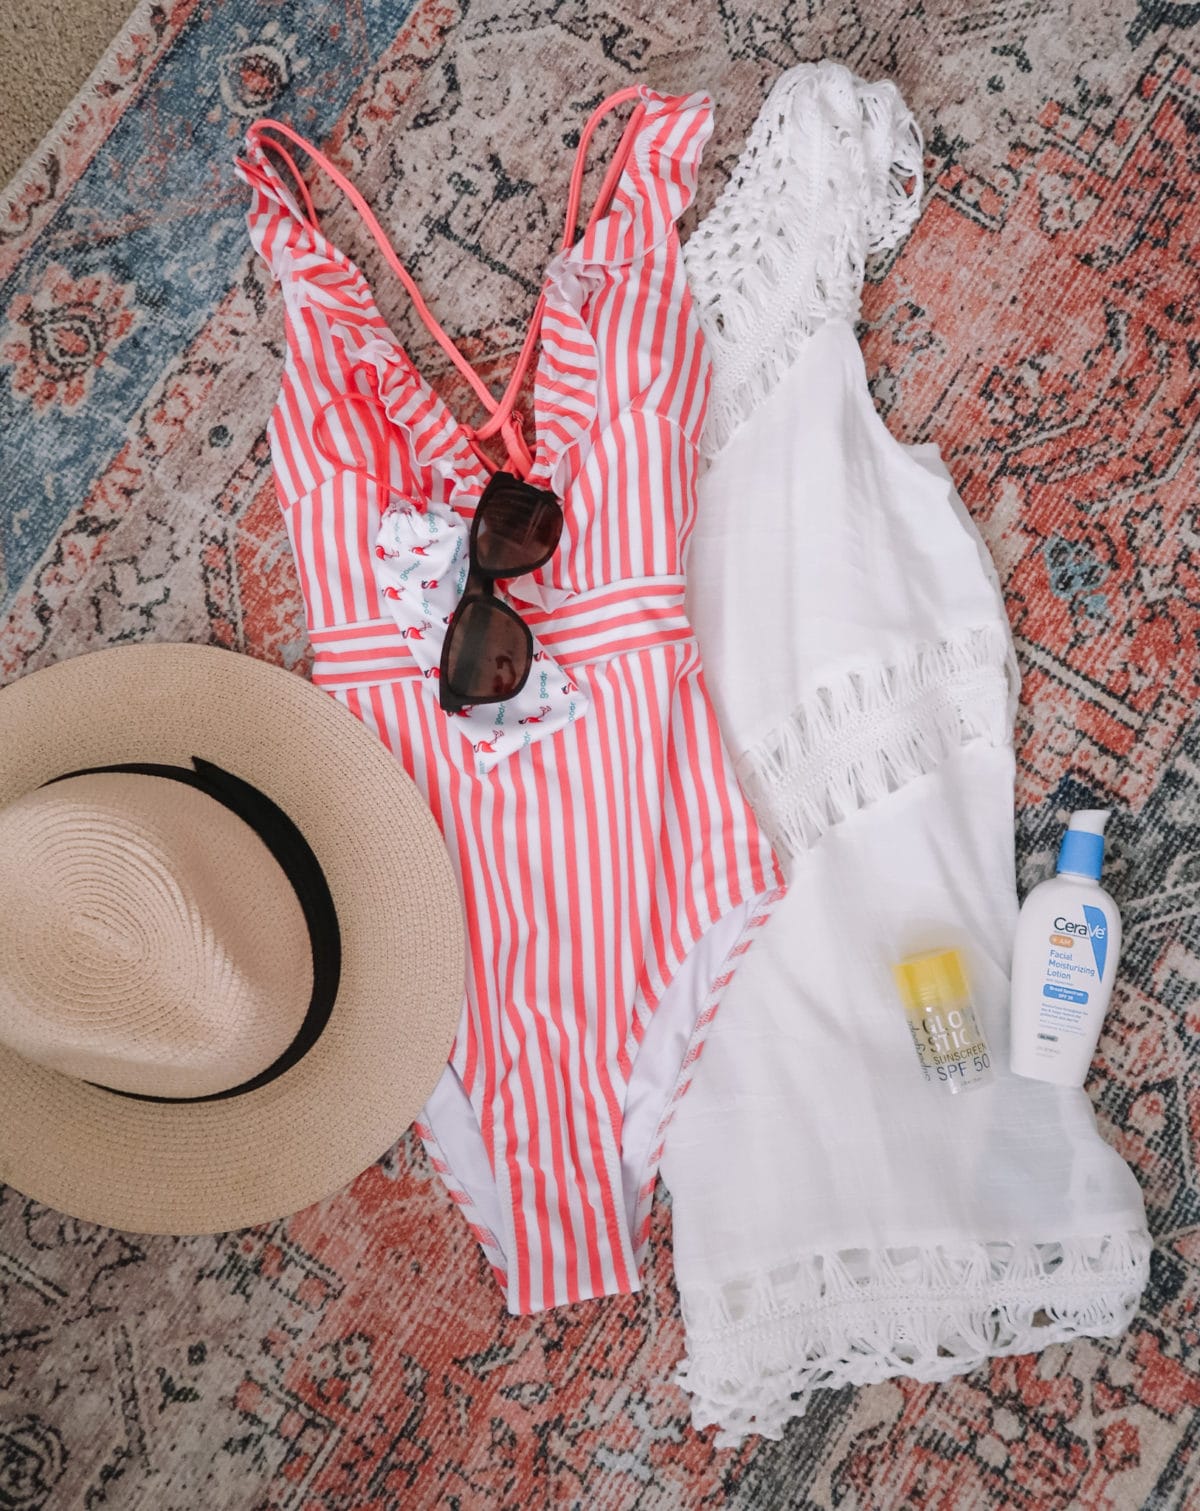 Packing Essentials, Stripe Swimsuit, CoverUp, Hat, Sunscreen, Lotion 